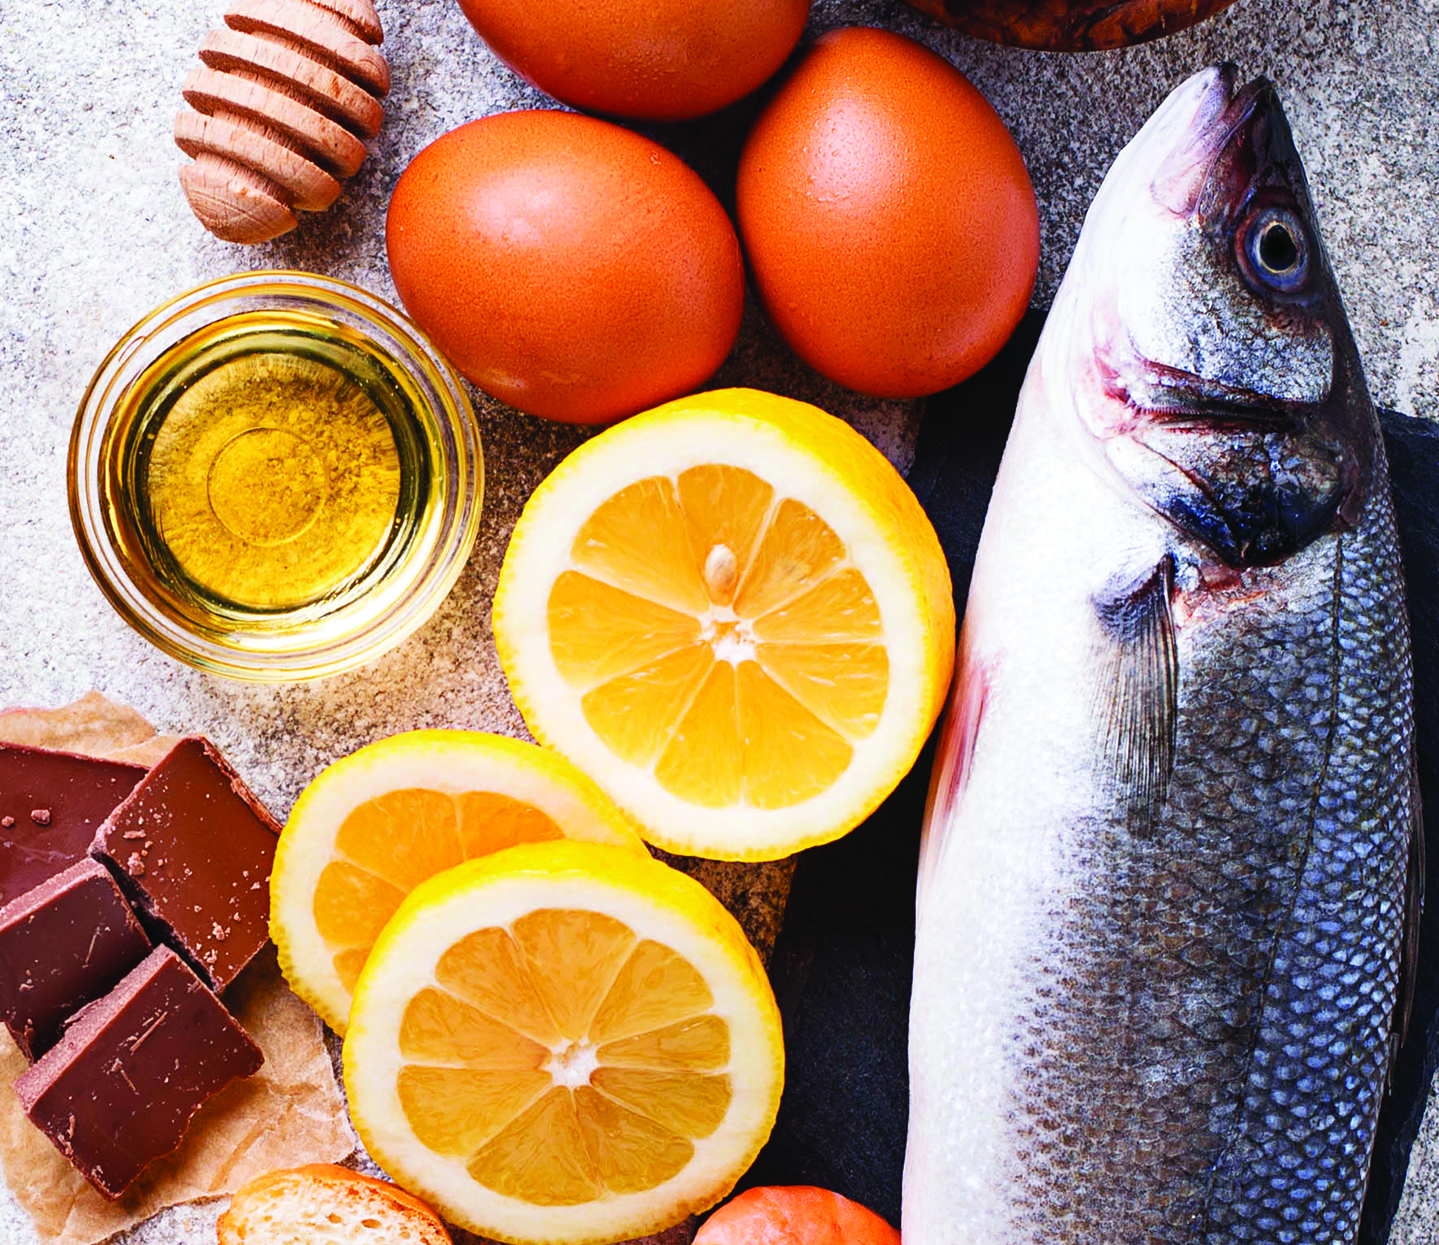 common food allergies to be aware of in nutrition fish dairy and citrus